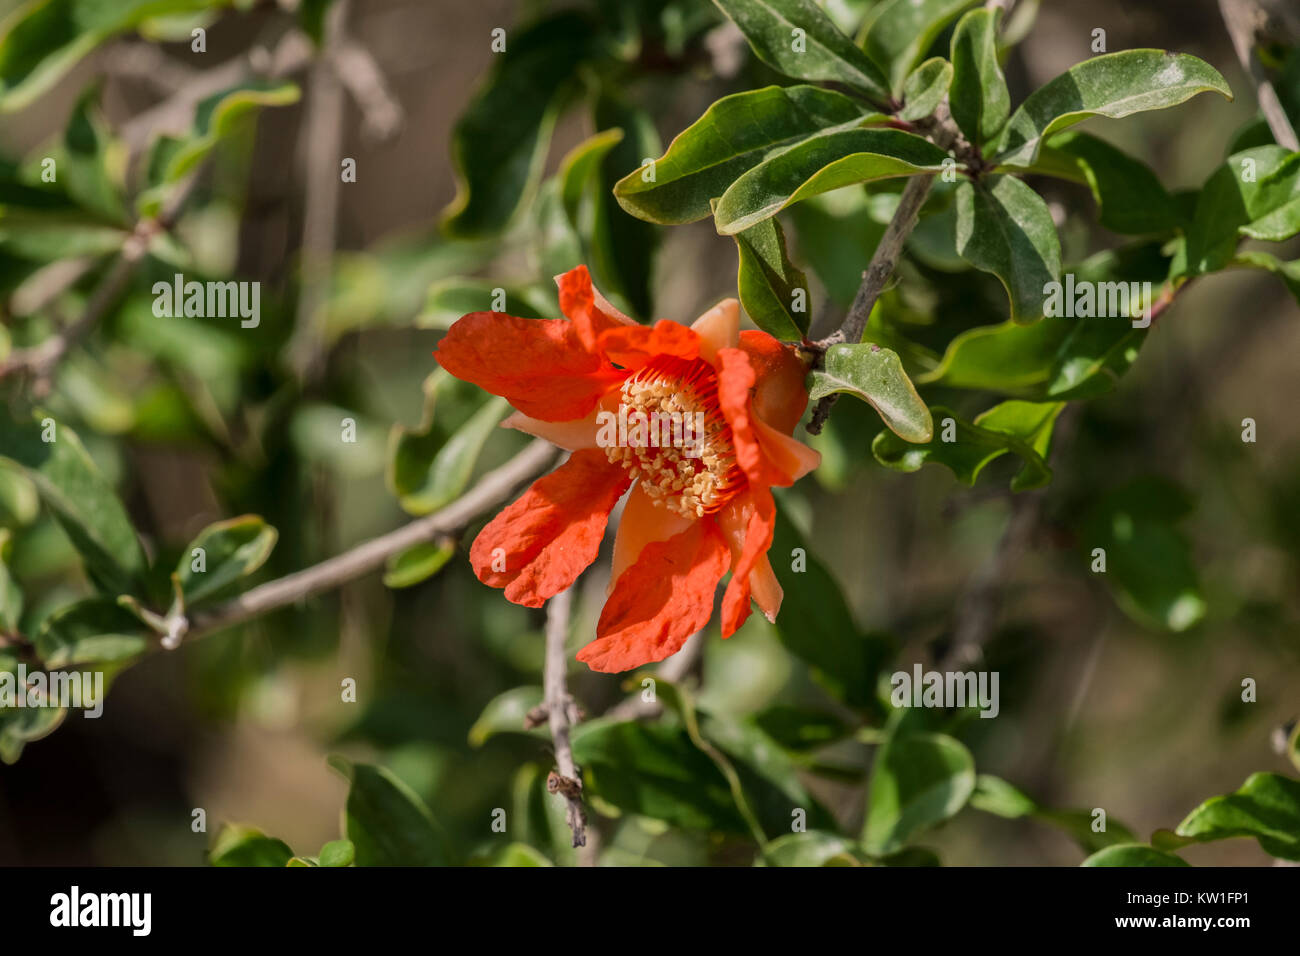 Red flower of a pomegranate tree is waiting for its time to turn into a fruit (Punica granatum) Stock Photo